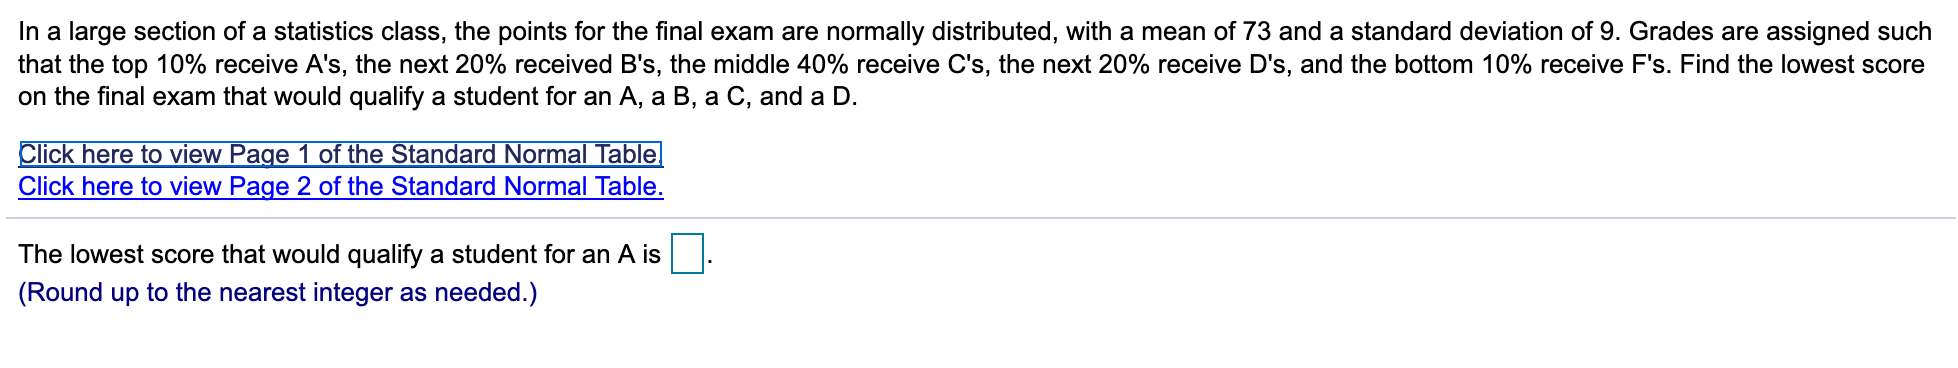 In a large section of a statistics class, the points for the final exam are normally distributed, with a mean of 73 and a standard deviation of 9. Grades are assigned such
that the top 10% receive A's, the next 20% received B's, the middle 40% receive C's, the next 20% receive D's , and the bottom 10% receive F's. Find the lowest score
on the final exam that would qualify a student for an A, a B, a C, and a D.
Click here to view Page 1 of the Standard Normal Table
Click here to view Page 2 of the Standard Normal Table.
The lowest score that would qualify a student for an A is
(Round up to the nearest integer as needed.)
